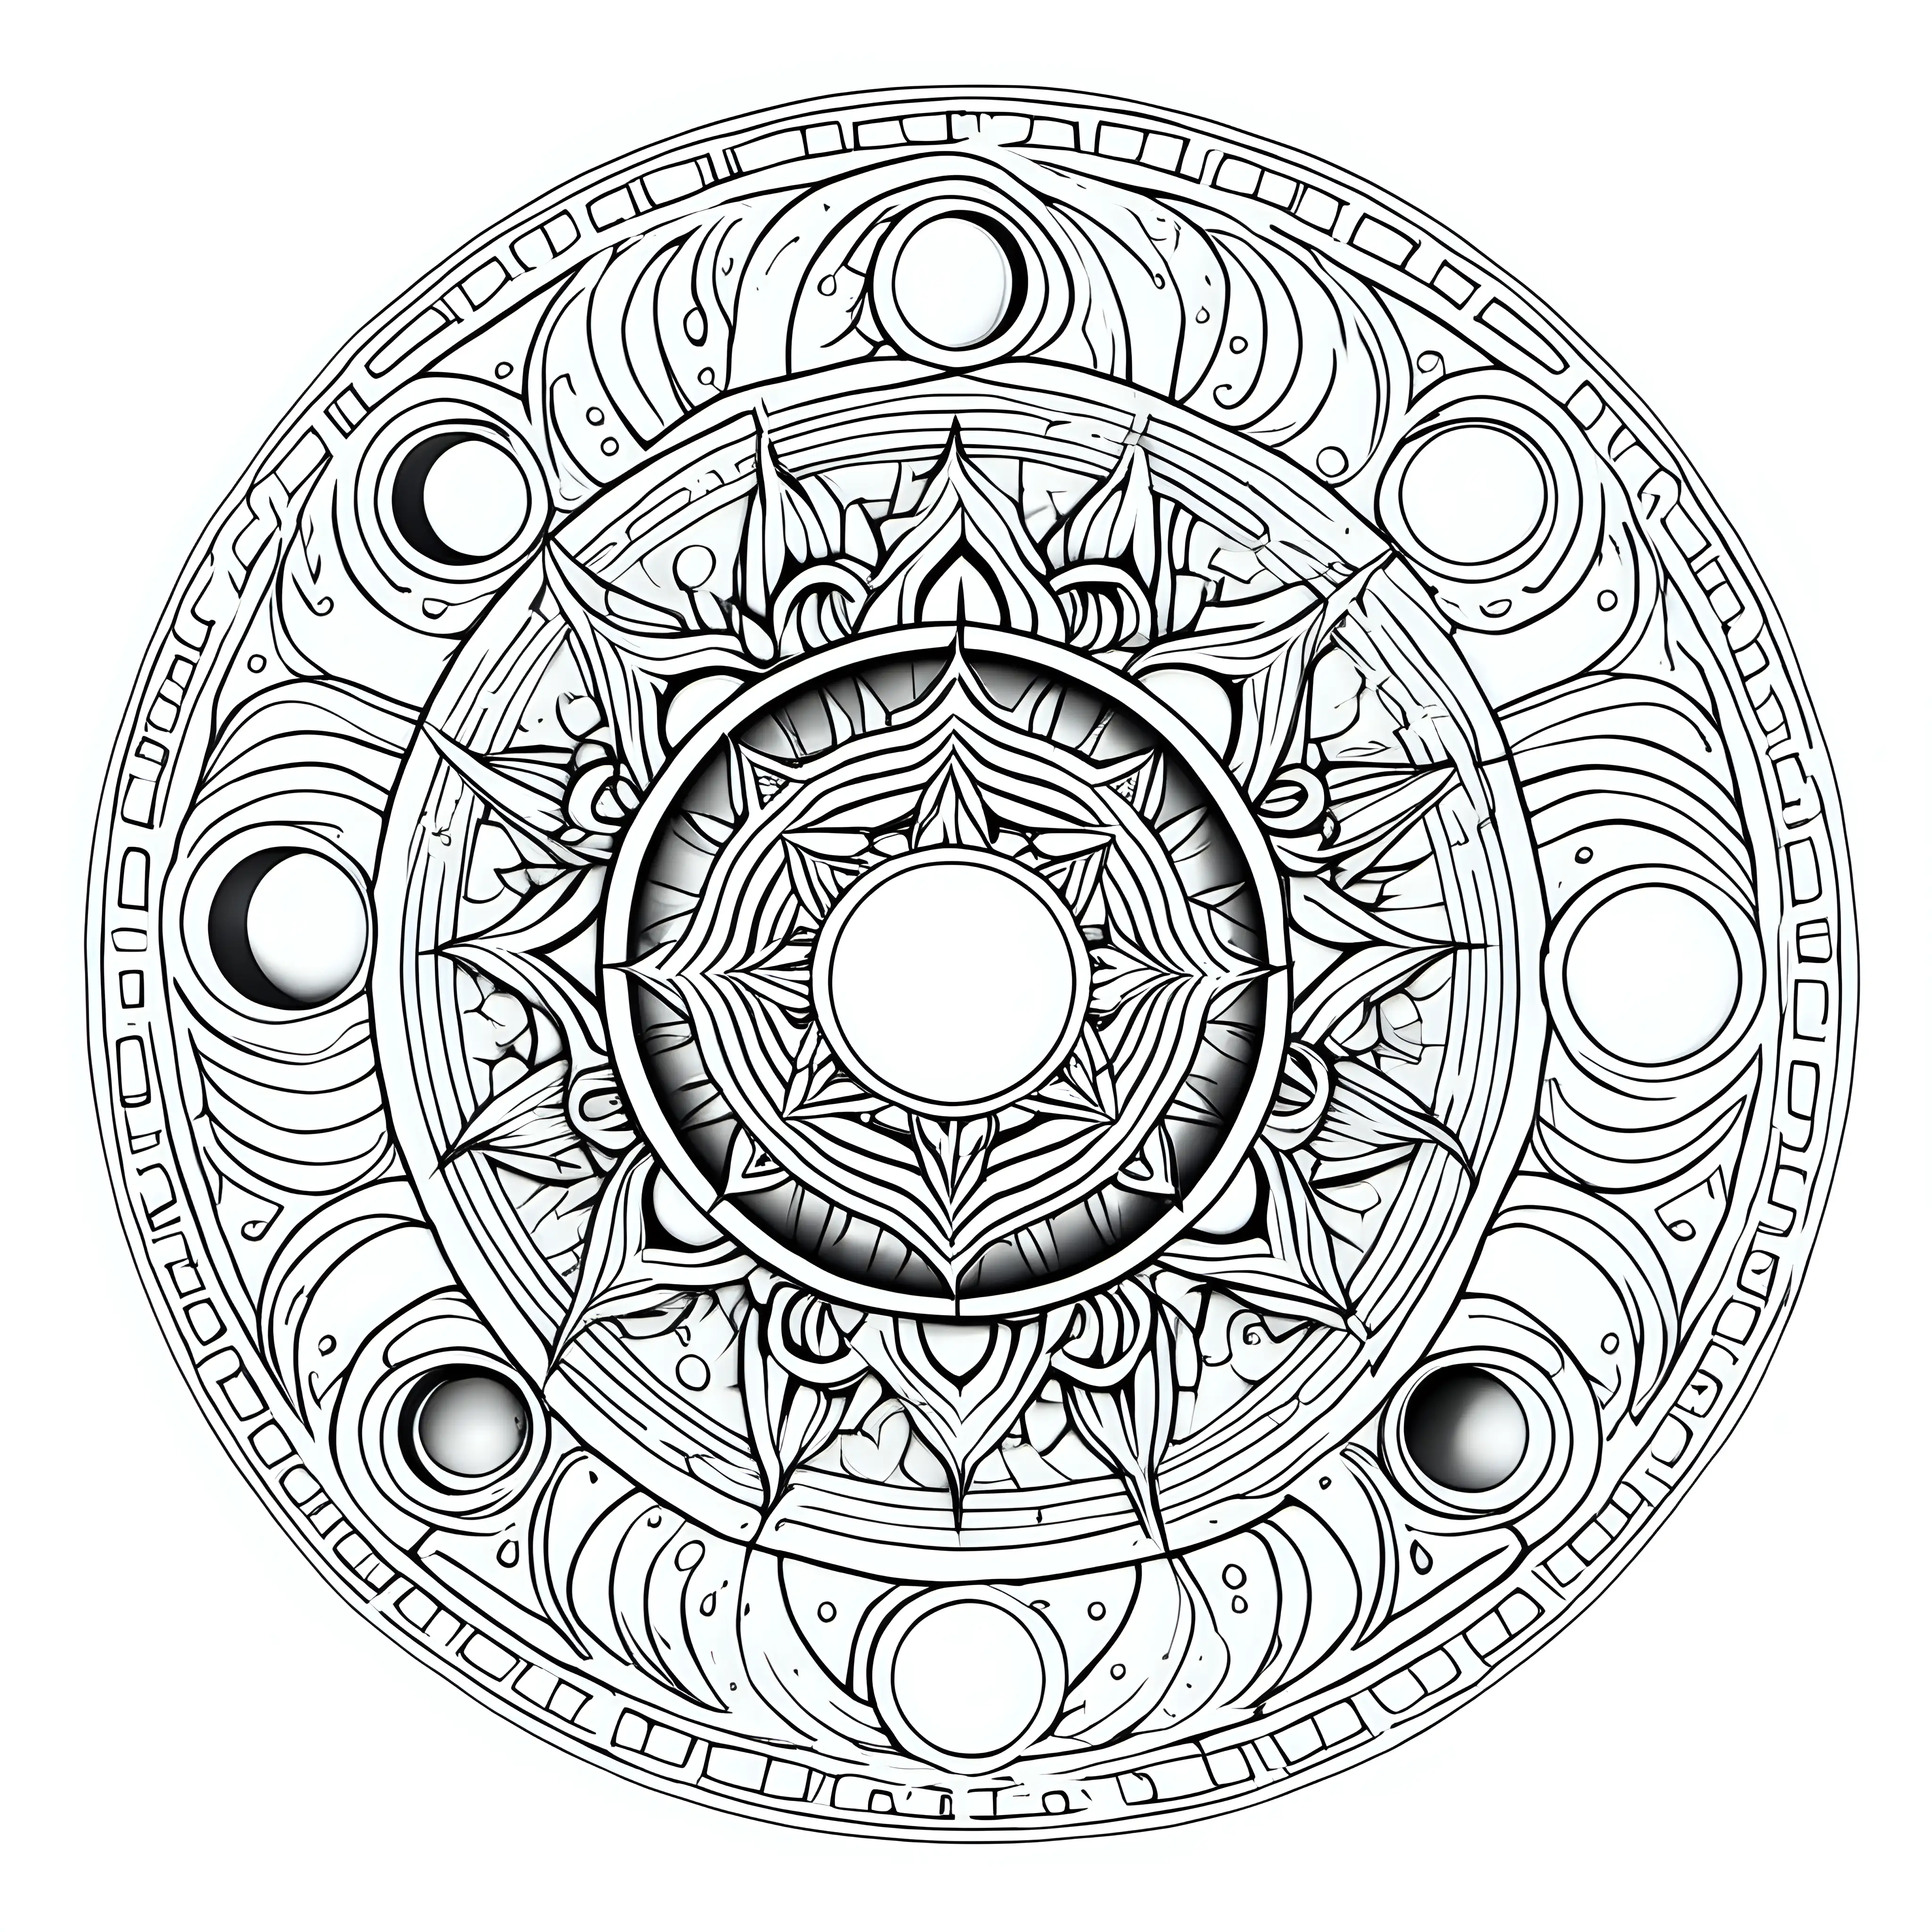 Moon Phases Mandala Coloring Page Celestial Crescent and Full Moon Patterns